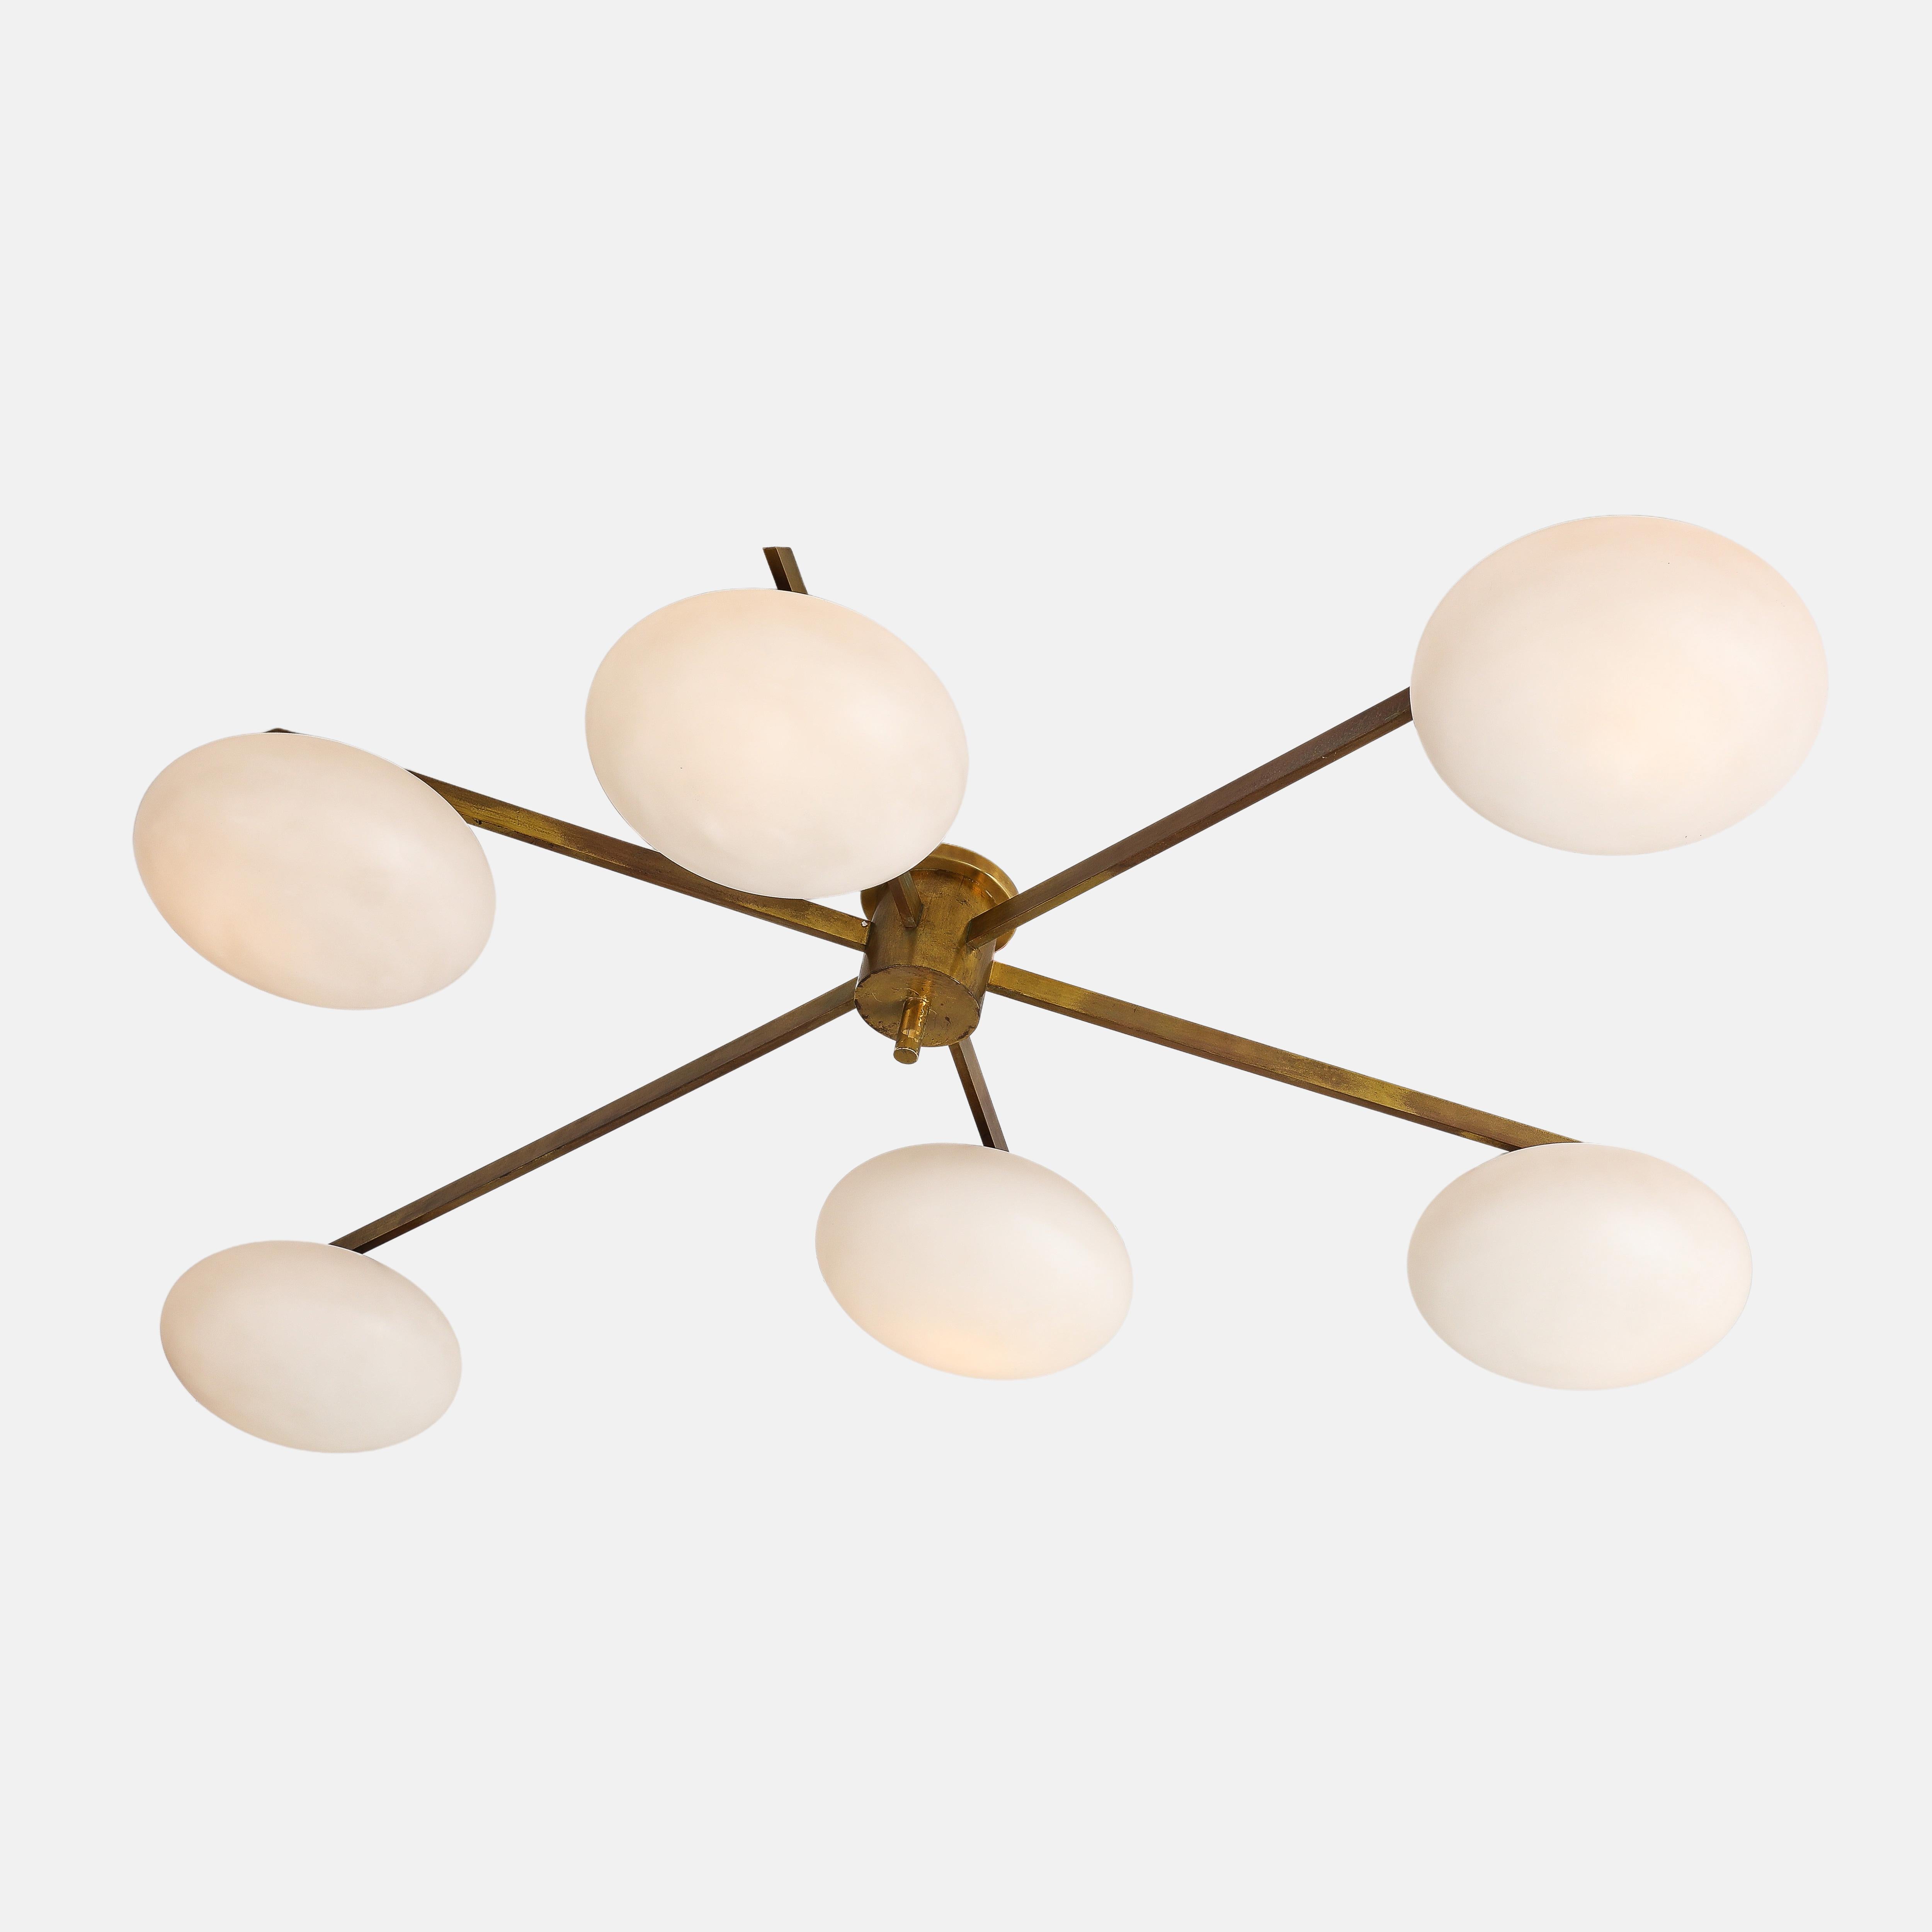 Angelo Lelli for Arredoluce Original Sei Lune Ceiling Light, circa 1961 In Good Condition For Sale In New York, NY